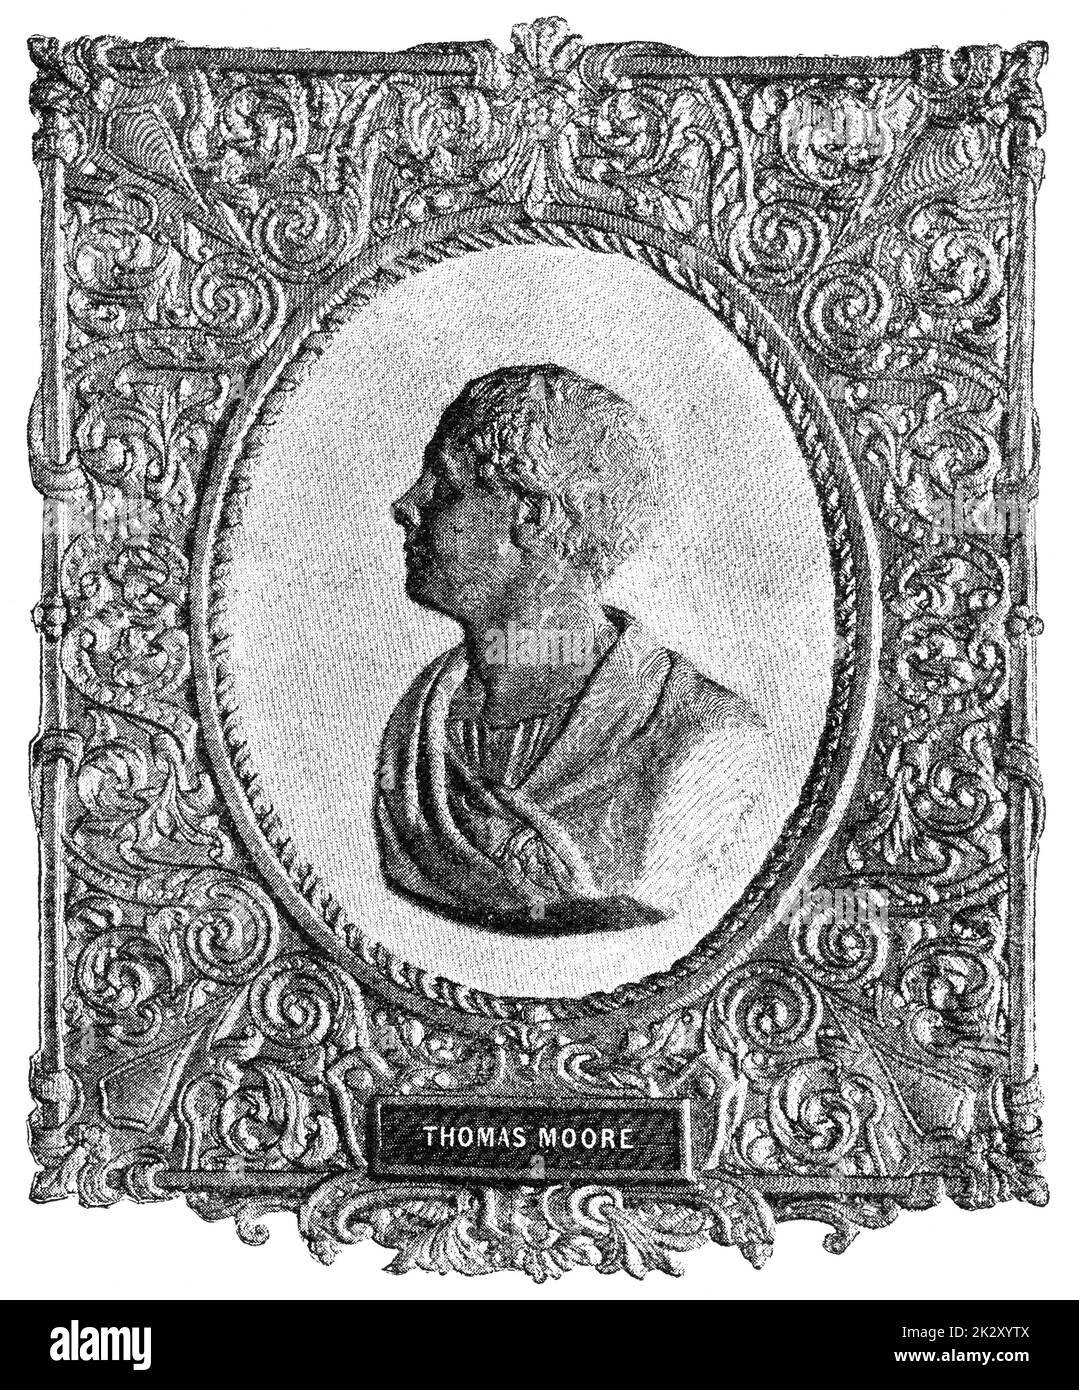 Portrait of Thomas Moore (bas-relief) - an Irish writer, poet and lyricist celebrated for his Irish Melodies. Illustration of the 19th century. White background. Stock Photo